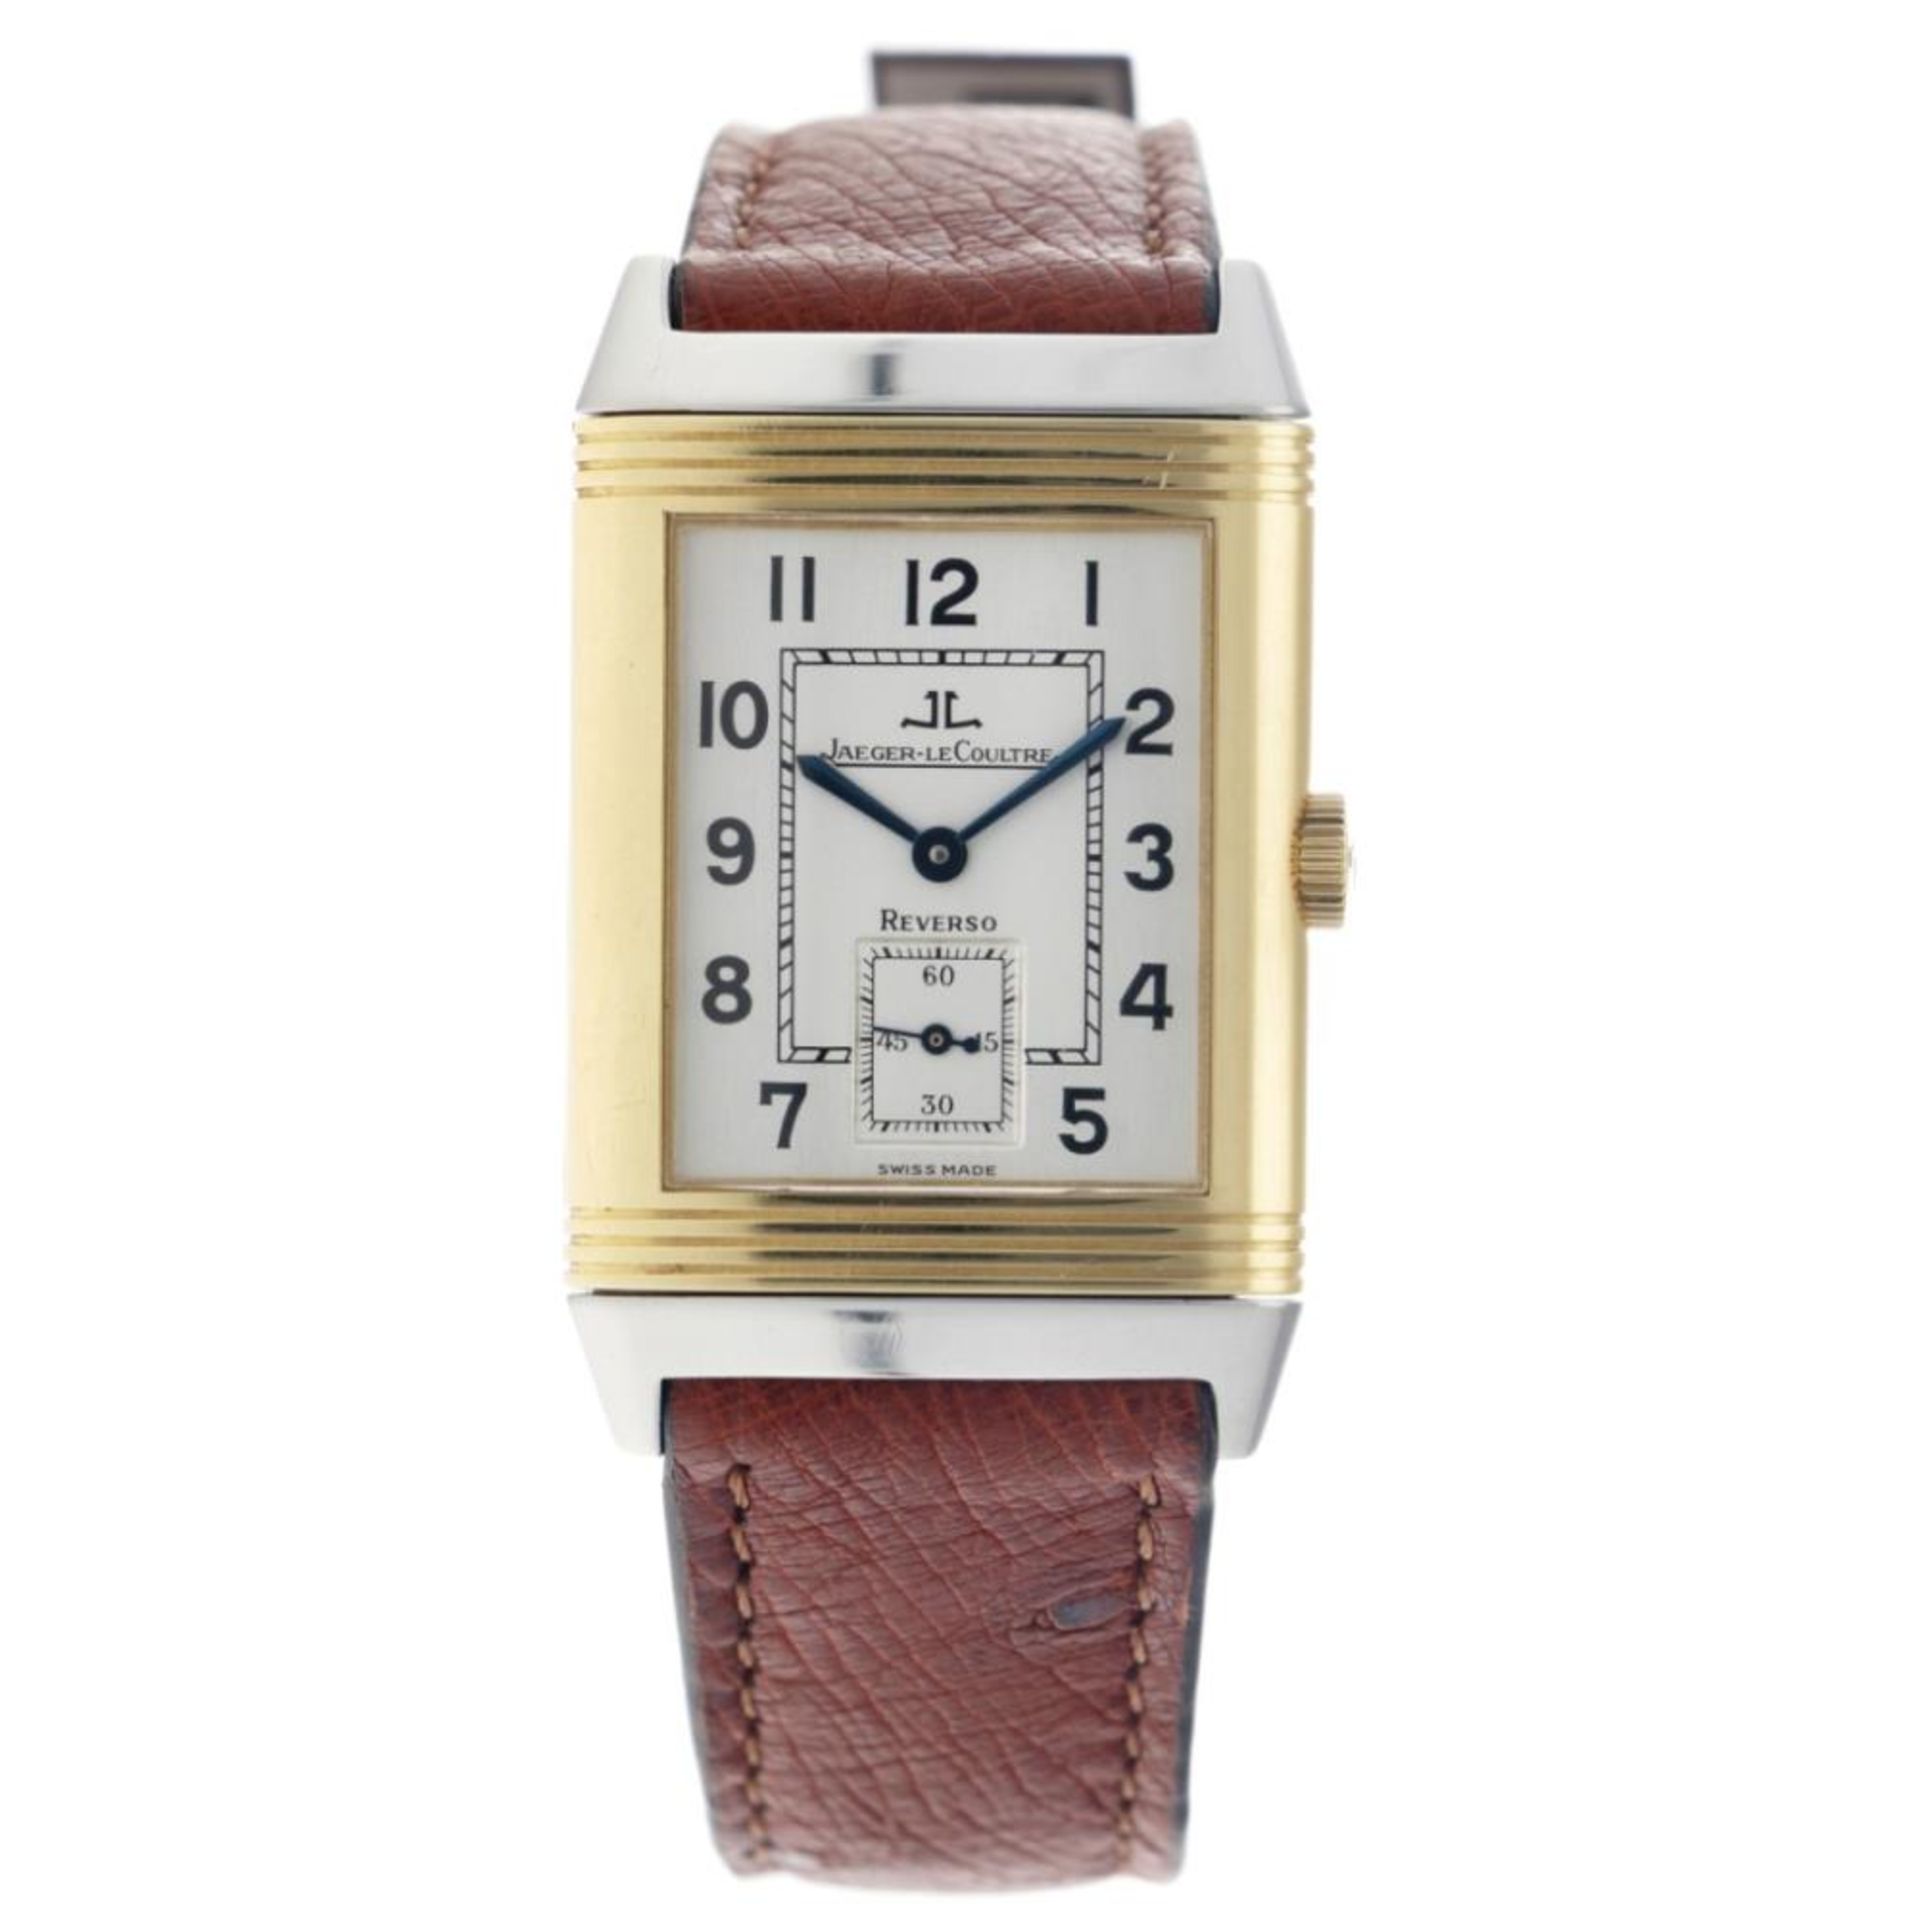 Jaeger-LeCoultre Reverso - Men's watch - approx. 1995. - Image 2 of 14